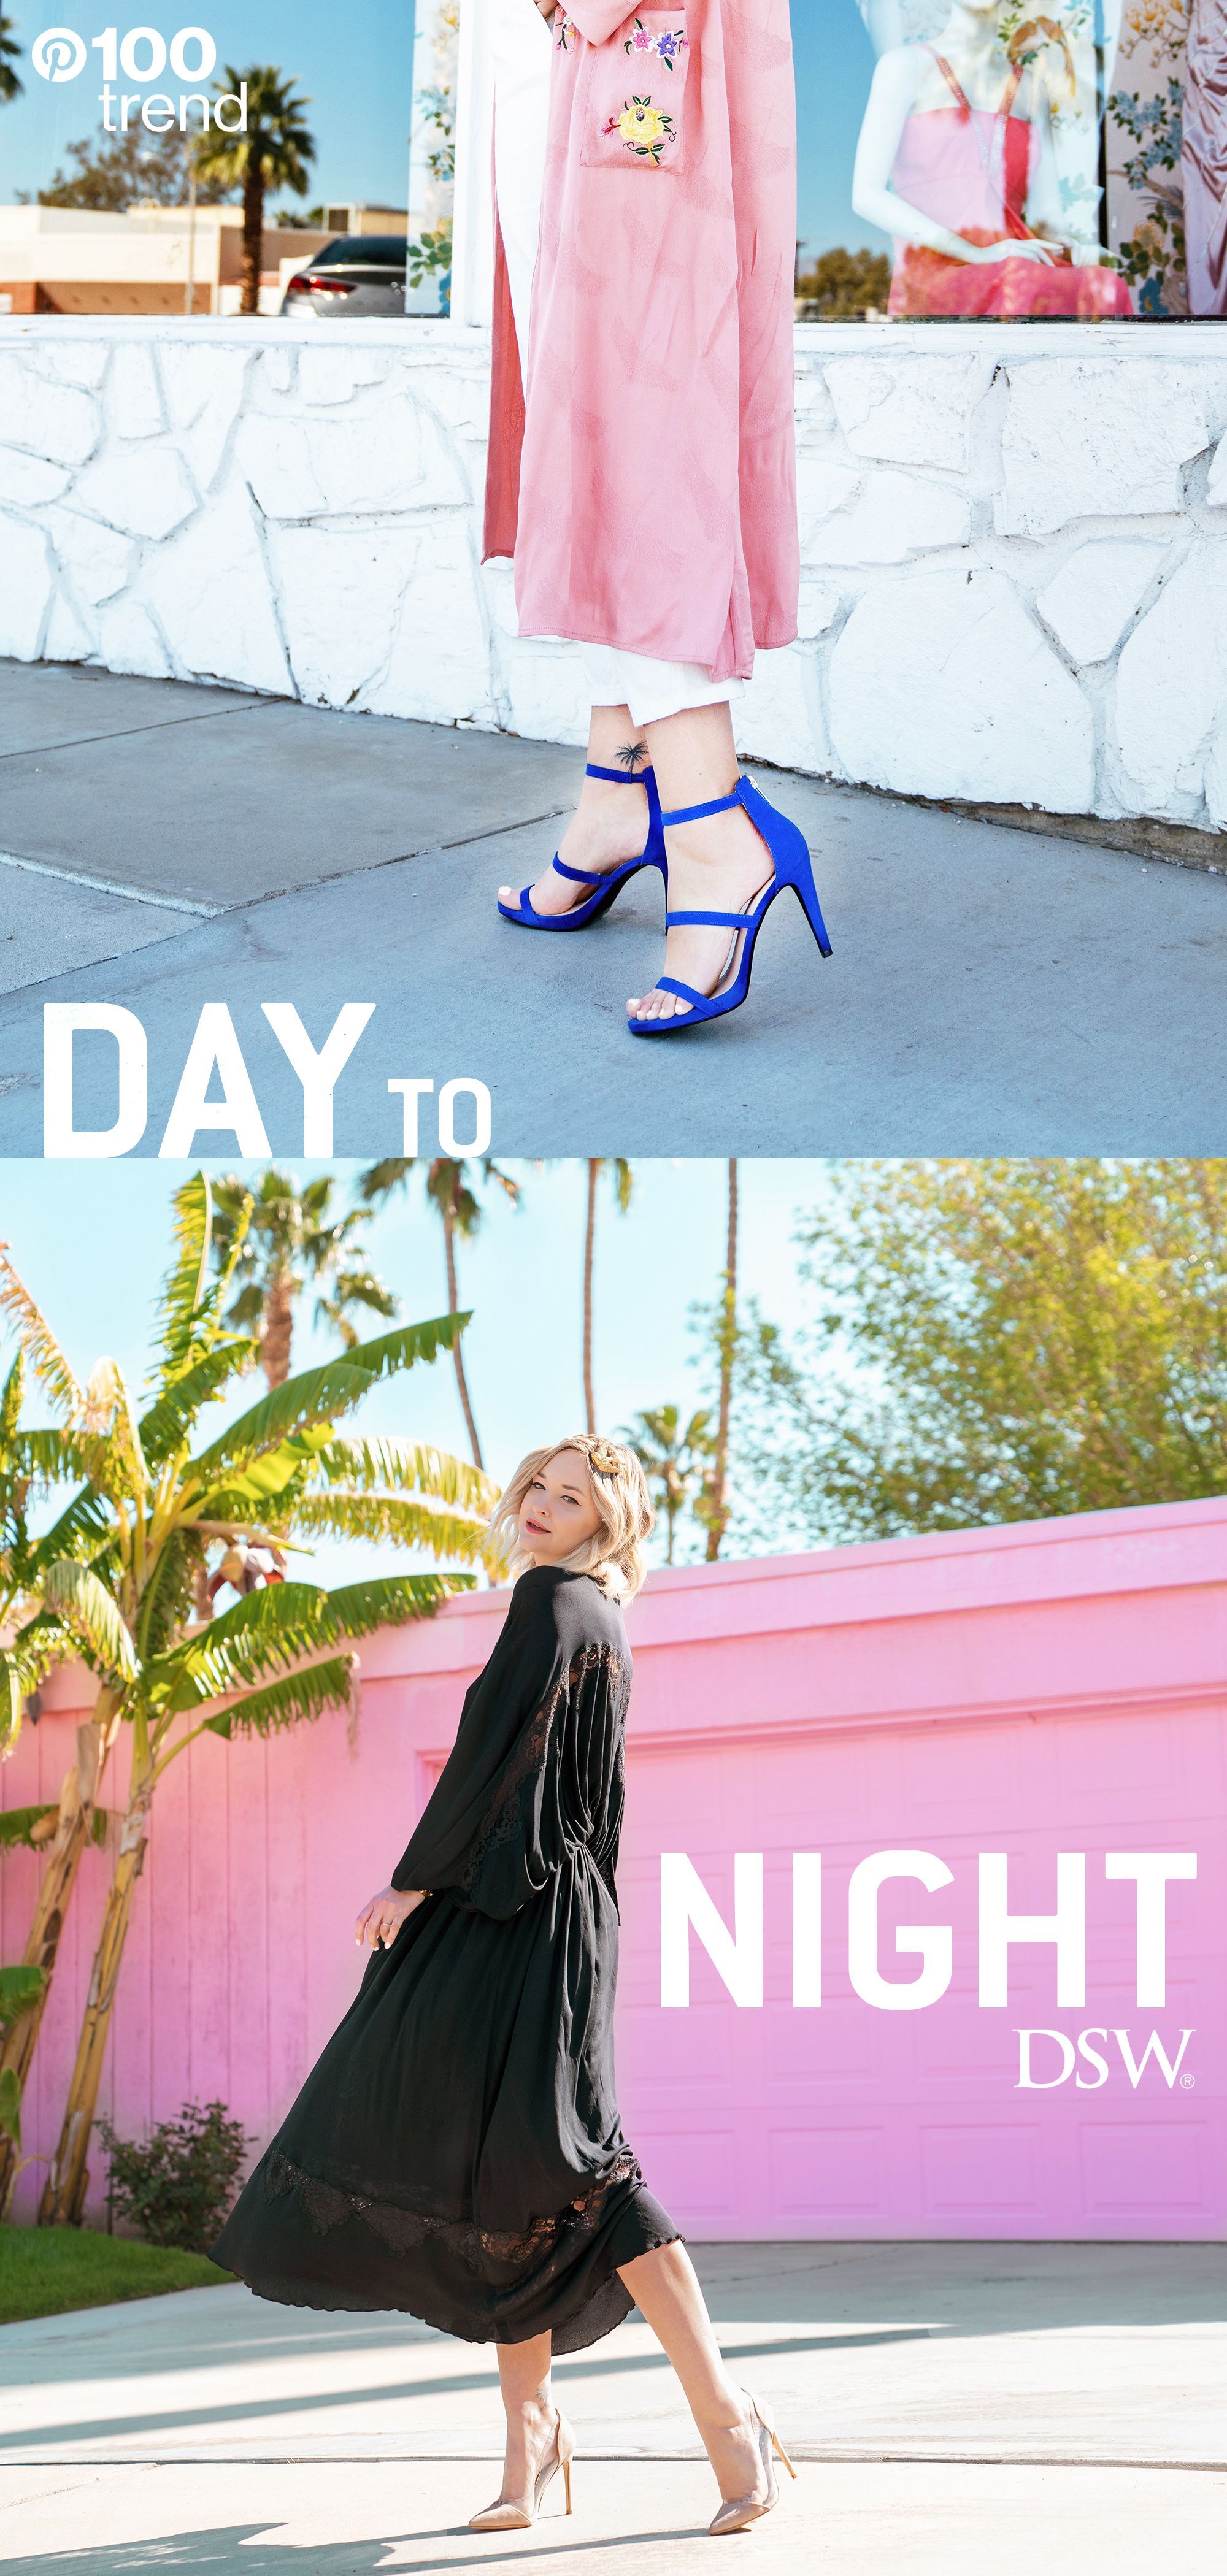 Day to Night Heels -   17 dress Bodycon urban outfitters
 ideas